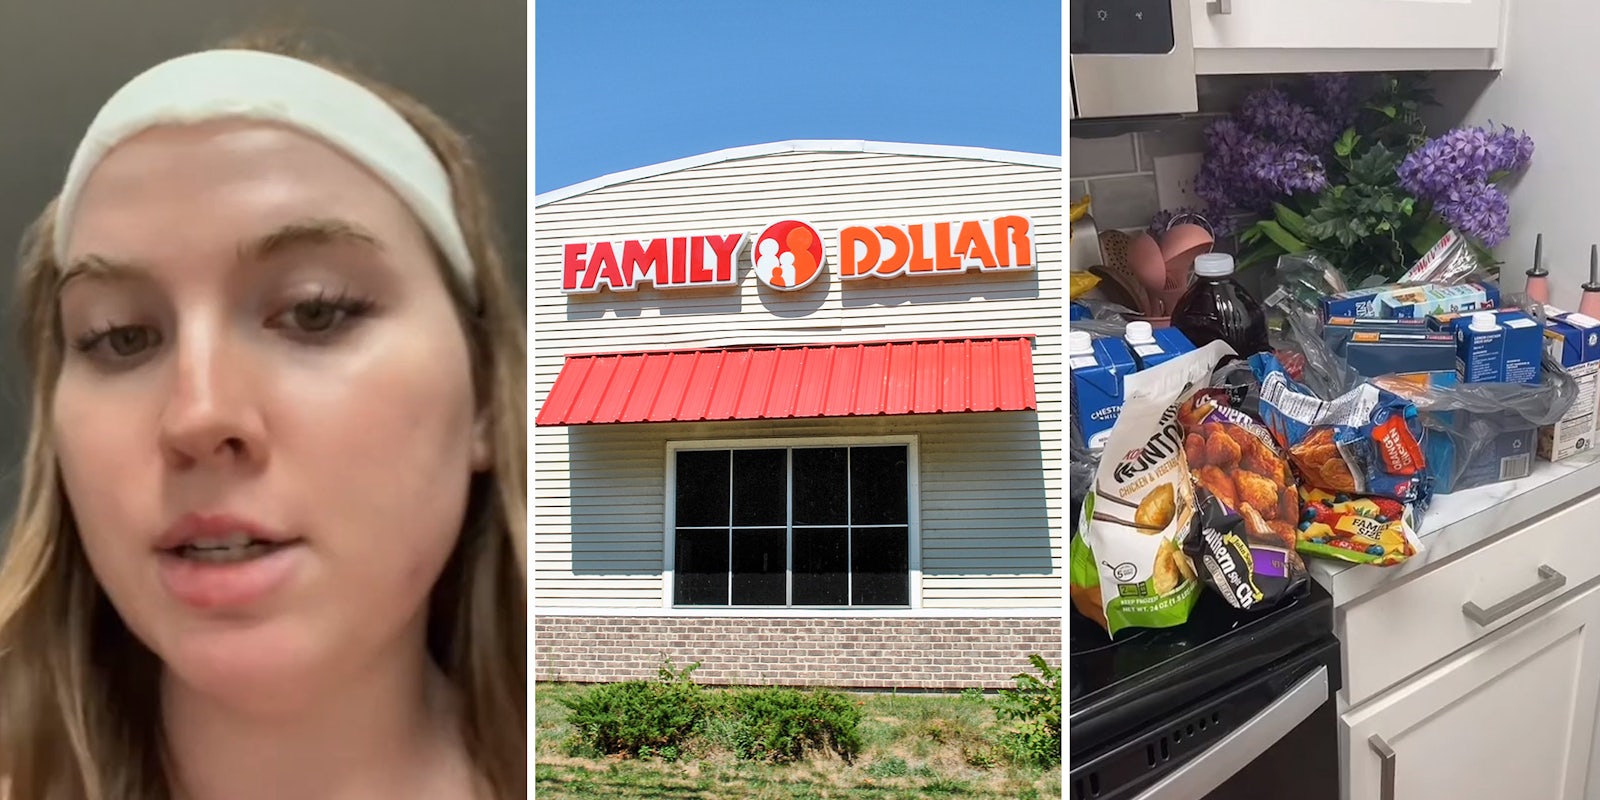 Shopper says she cut nearly $100 off her grocery bill by shopping at Family Dollar.